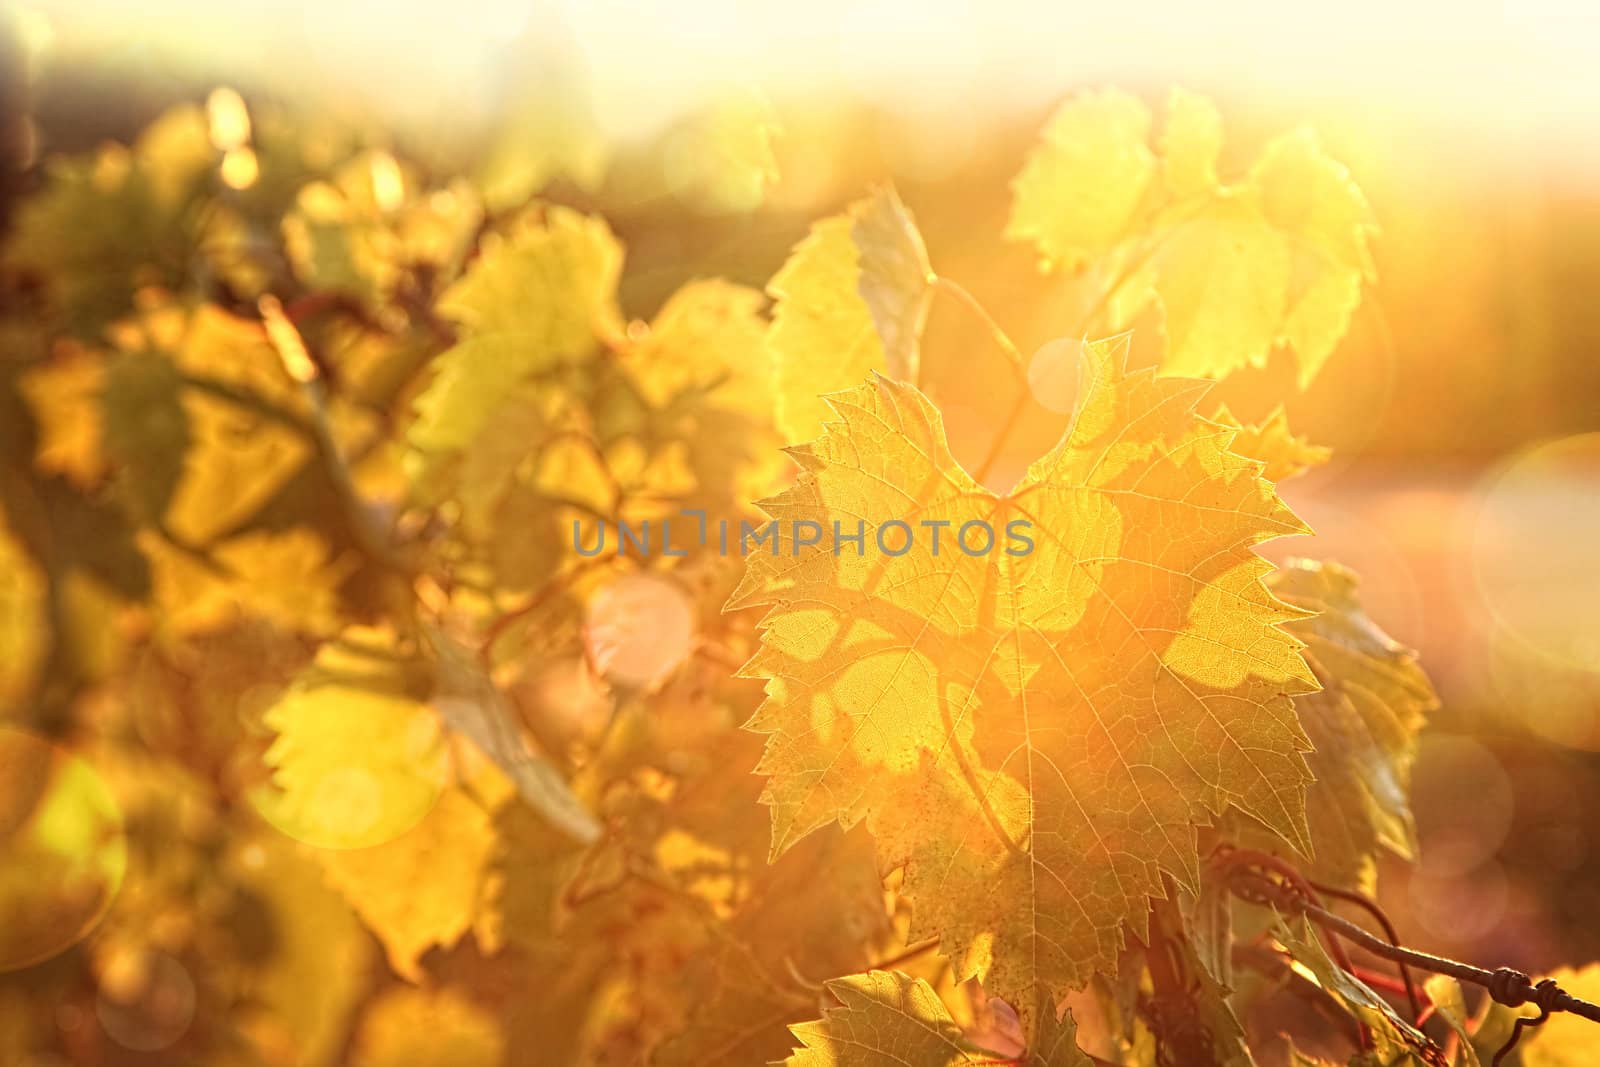 Grape vines at sunset by Sandralise